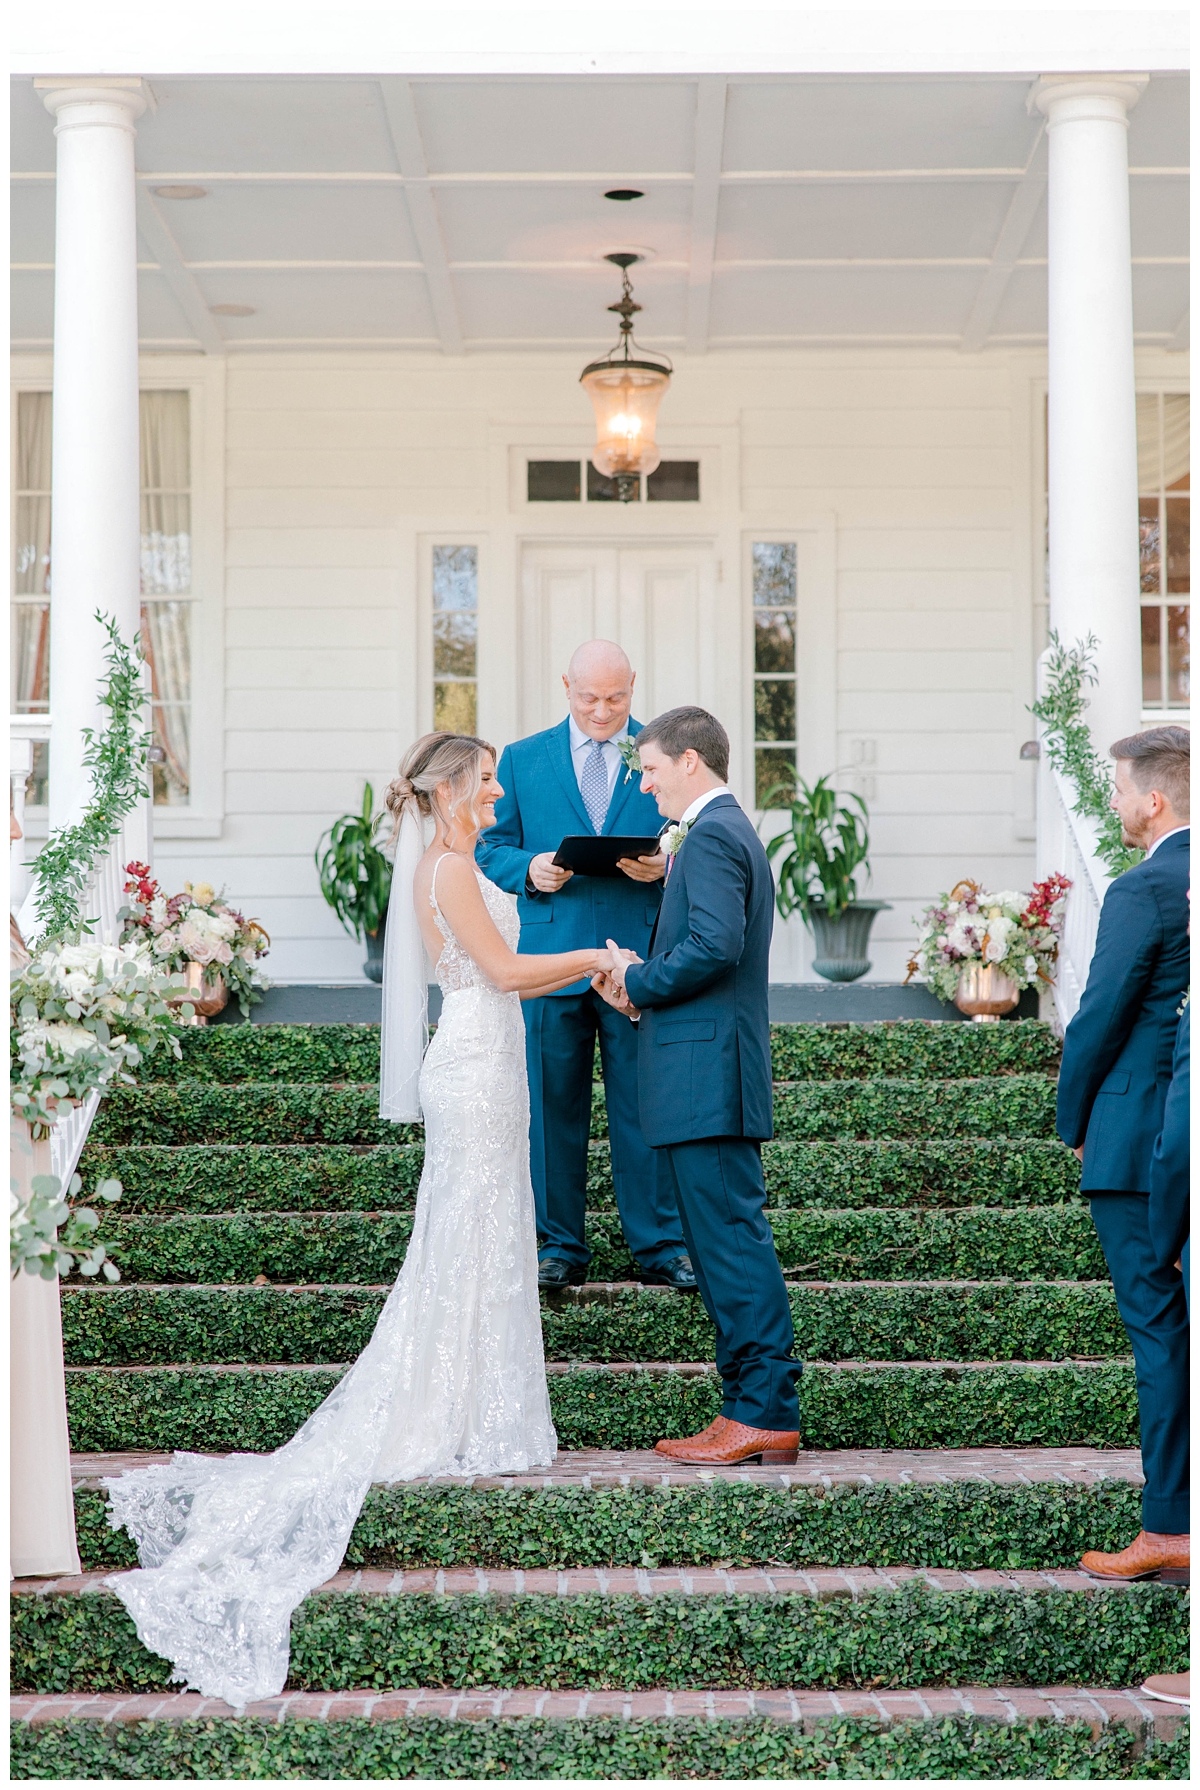 Bride and Groom hold hands during ceremony at Old Wide Awake outside charleston, SC